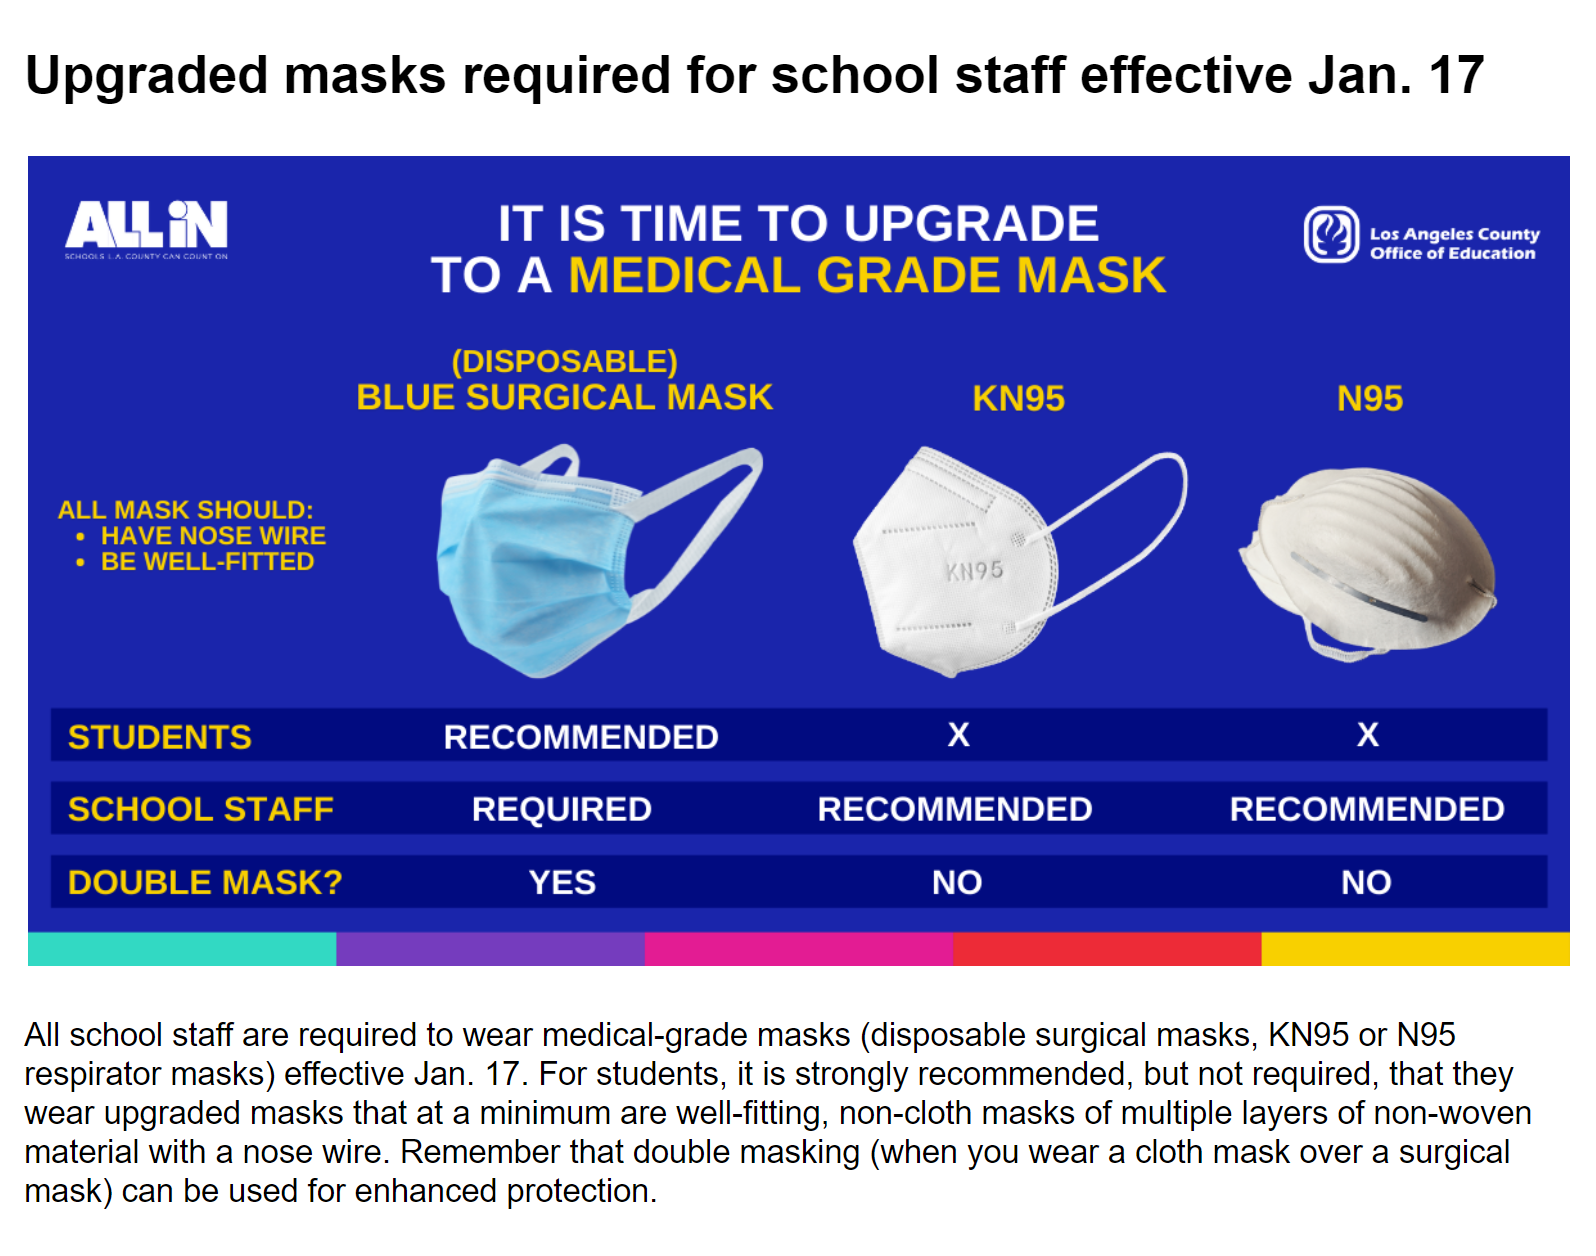 Mask requirements